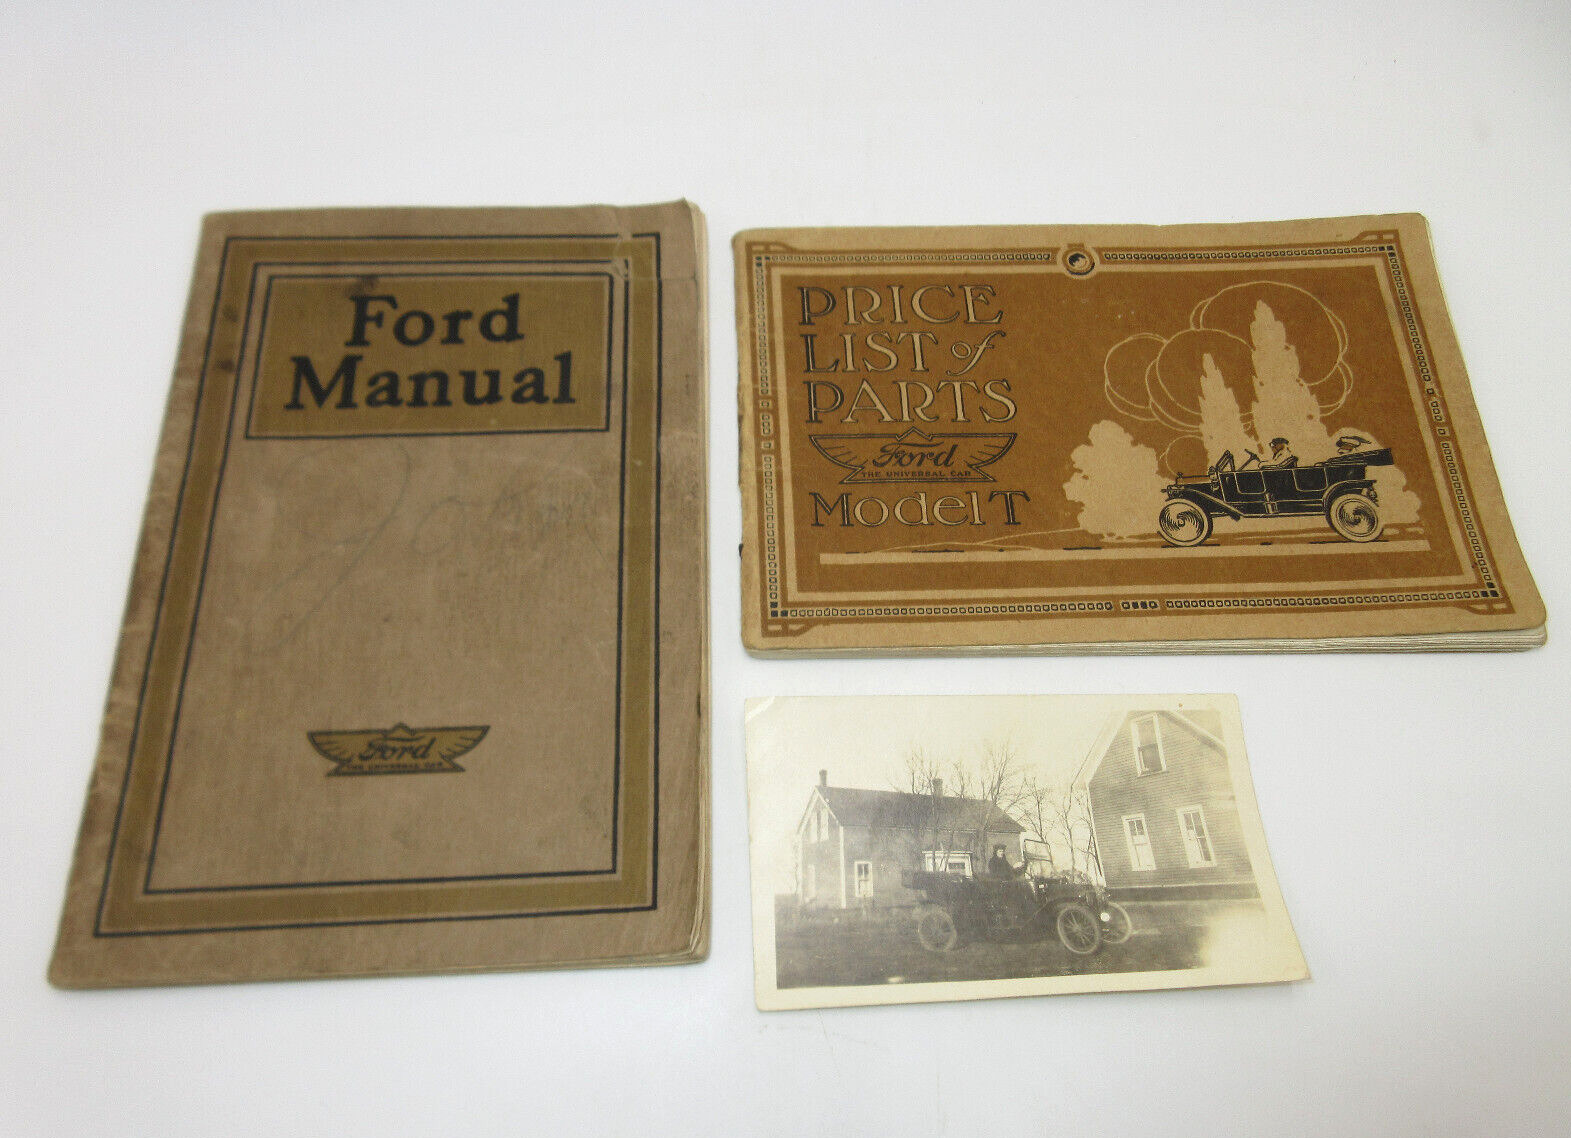 Vtg 1914 Ford Owners Manual Book Model T Price List of Parts 1909 - 1913 Catalog